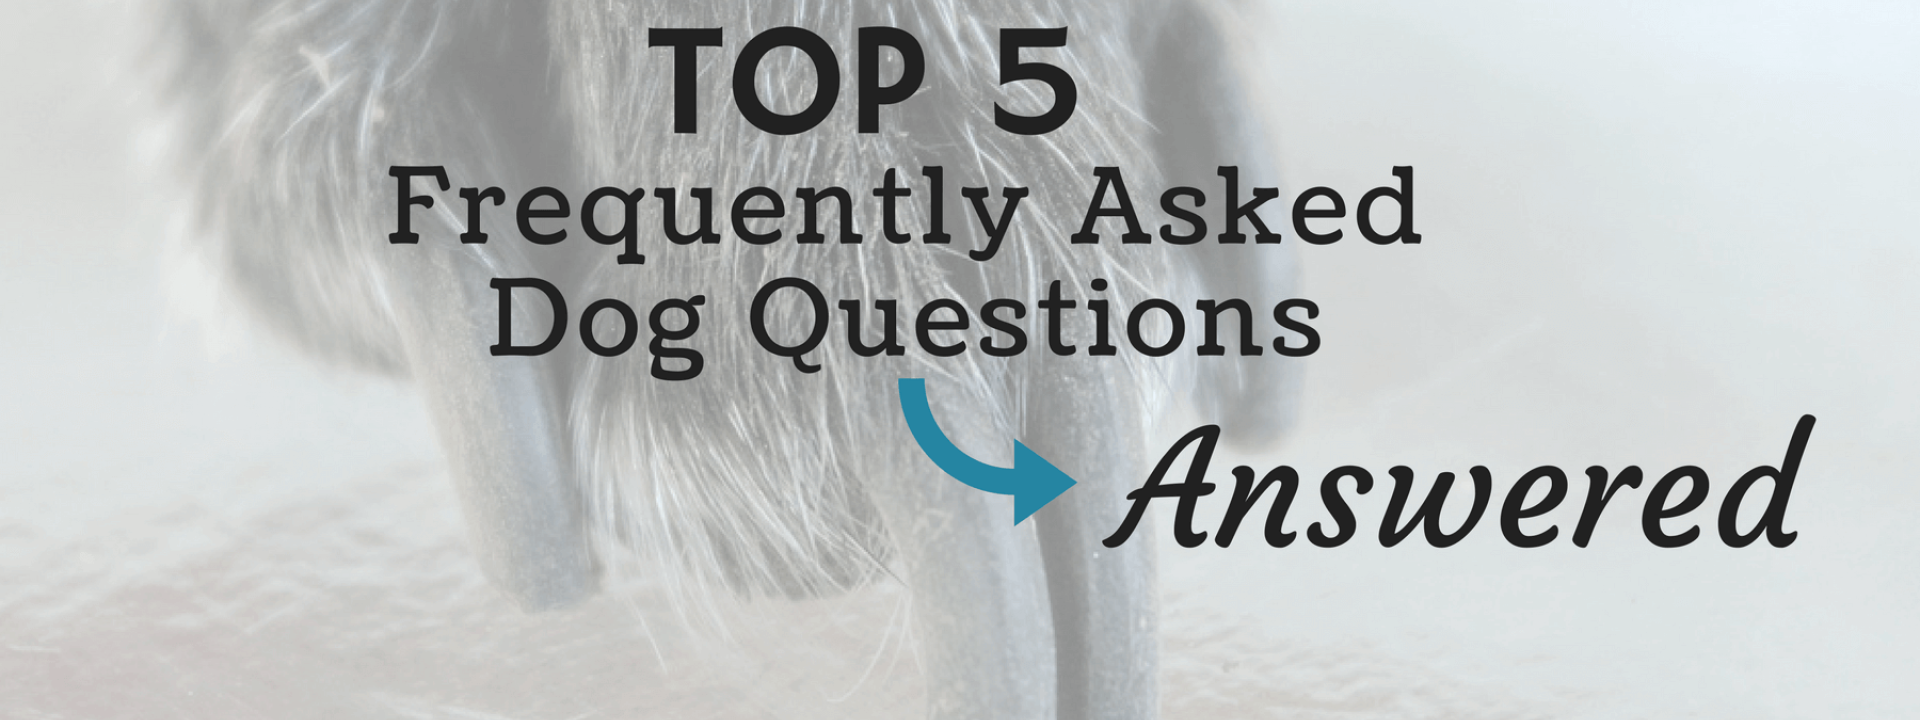 blog-title-dog-questions.png